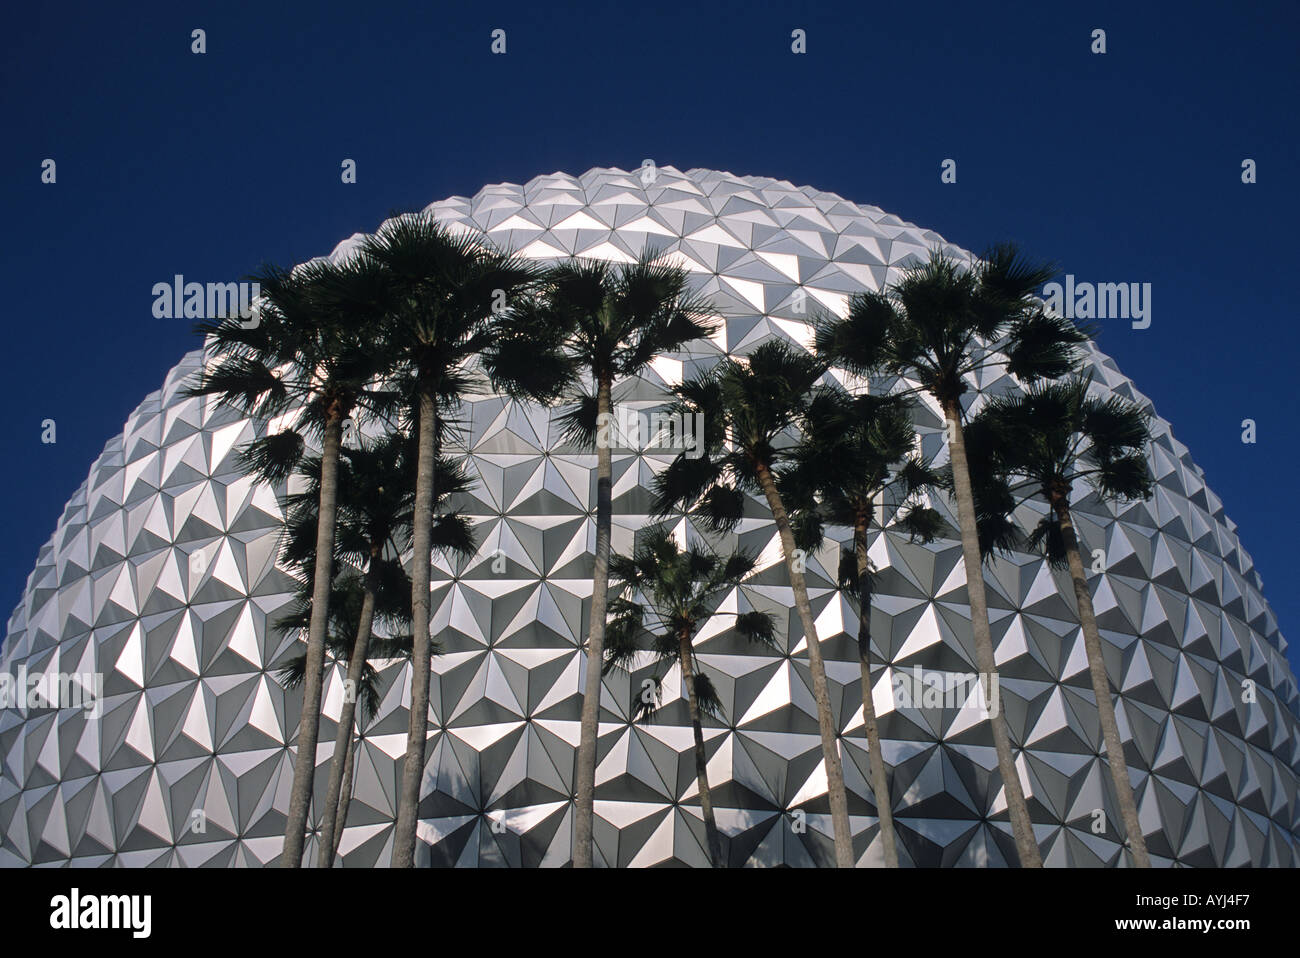 The exterior of the geosphere Spaceship Earth at the entrance of Epcot Center Disney World in Orlando Florida with palm trees  Stock Photo